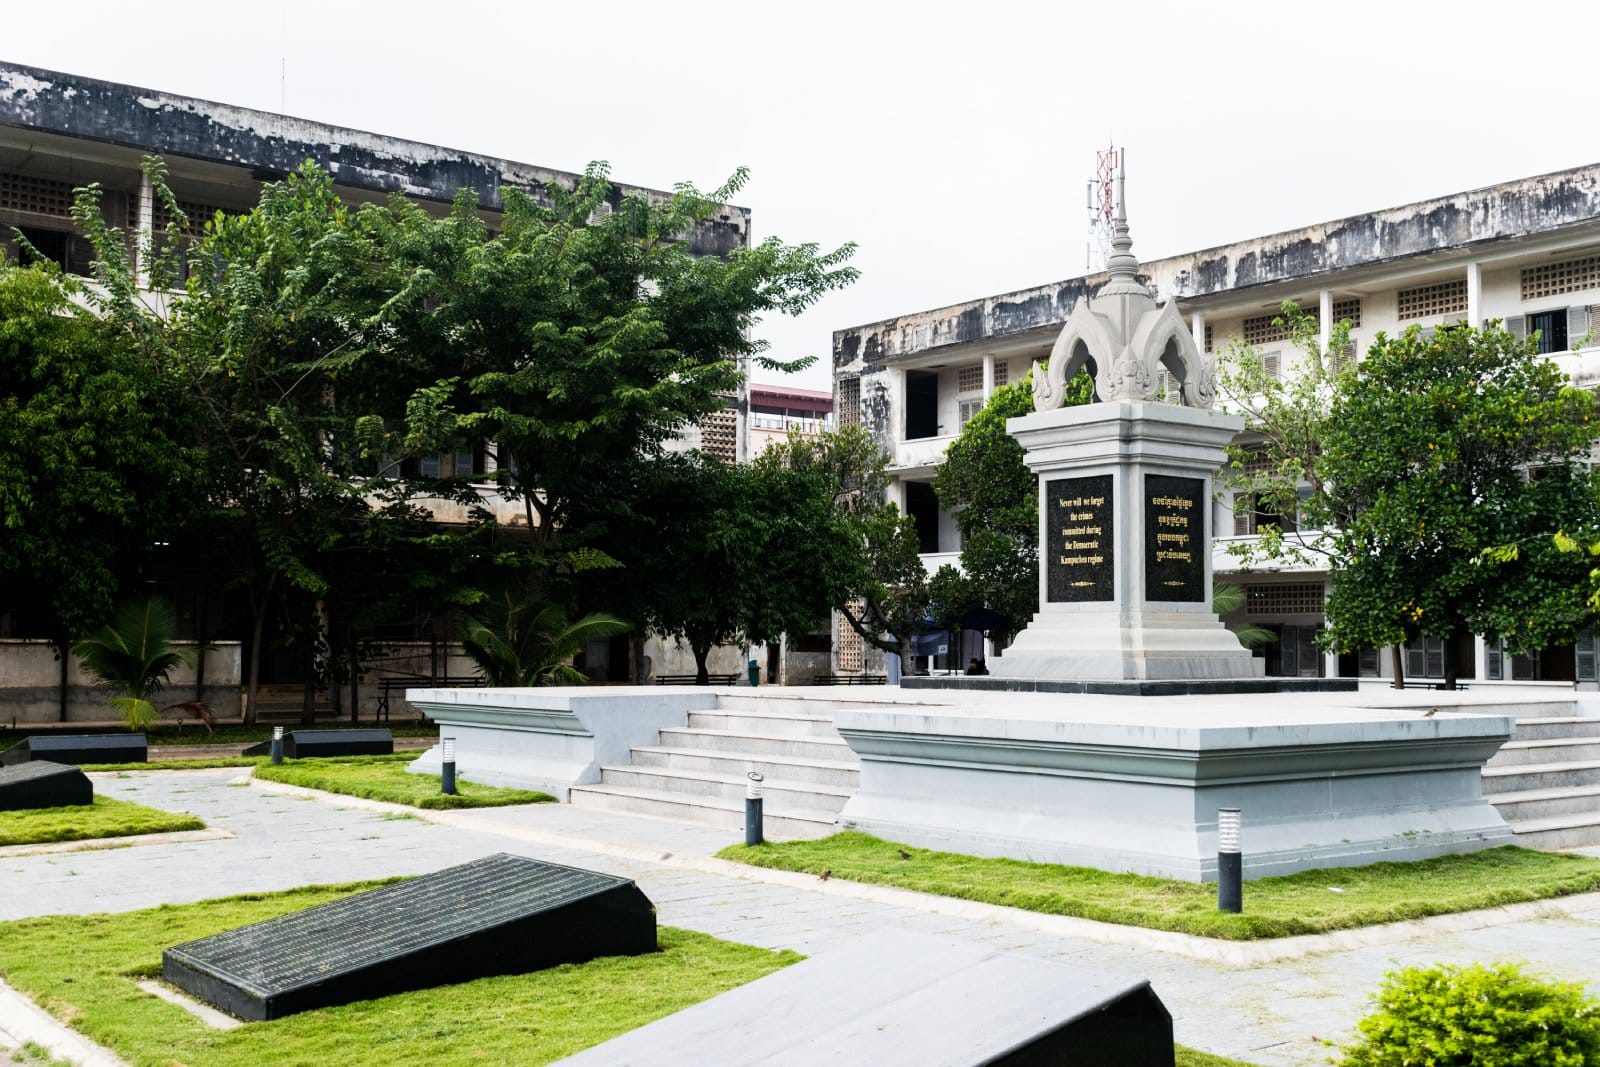 <p class="wp-caption-text">Image Credit: Shutterstock / LivingSync</p>  <p><span>Phnom Penh, the capital city of Cambodia, offers a stark look into the country’s turbulent history, especially under the Khmer Rouge regime. Veterans lead tours to significant historical sites such as the Tuol Sleng Genocide Museum, a former high school turned into a detention and torture center, and the Choeung Ek Genocidal Center, better known as the Killing Fields. These tours provide a somber yet essential insight into the atrocities committed, emphasizing the importance of remembrance and education to prevent such tragedies from occurring again.</span></p>